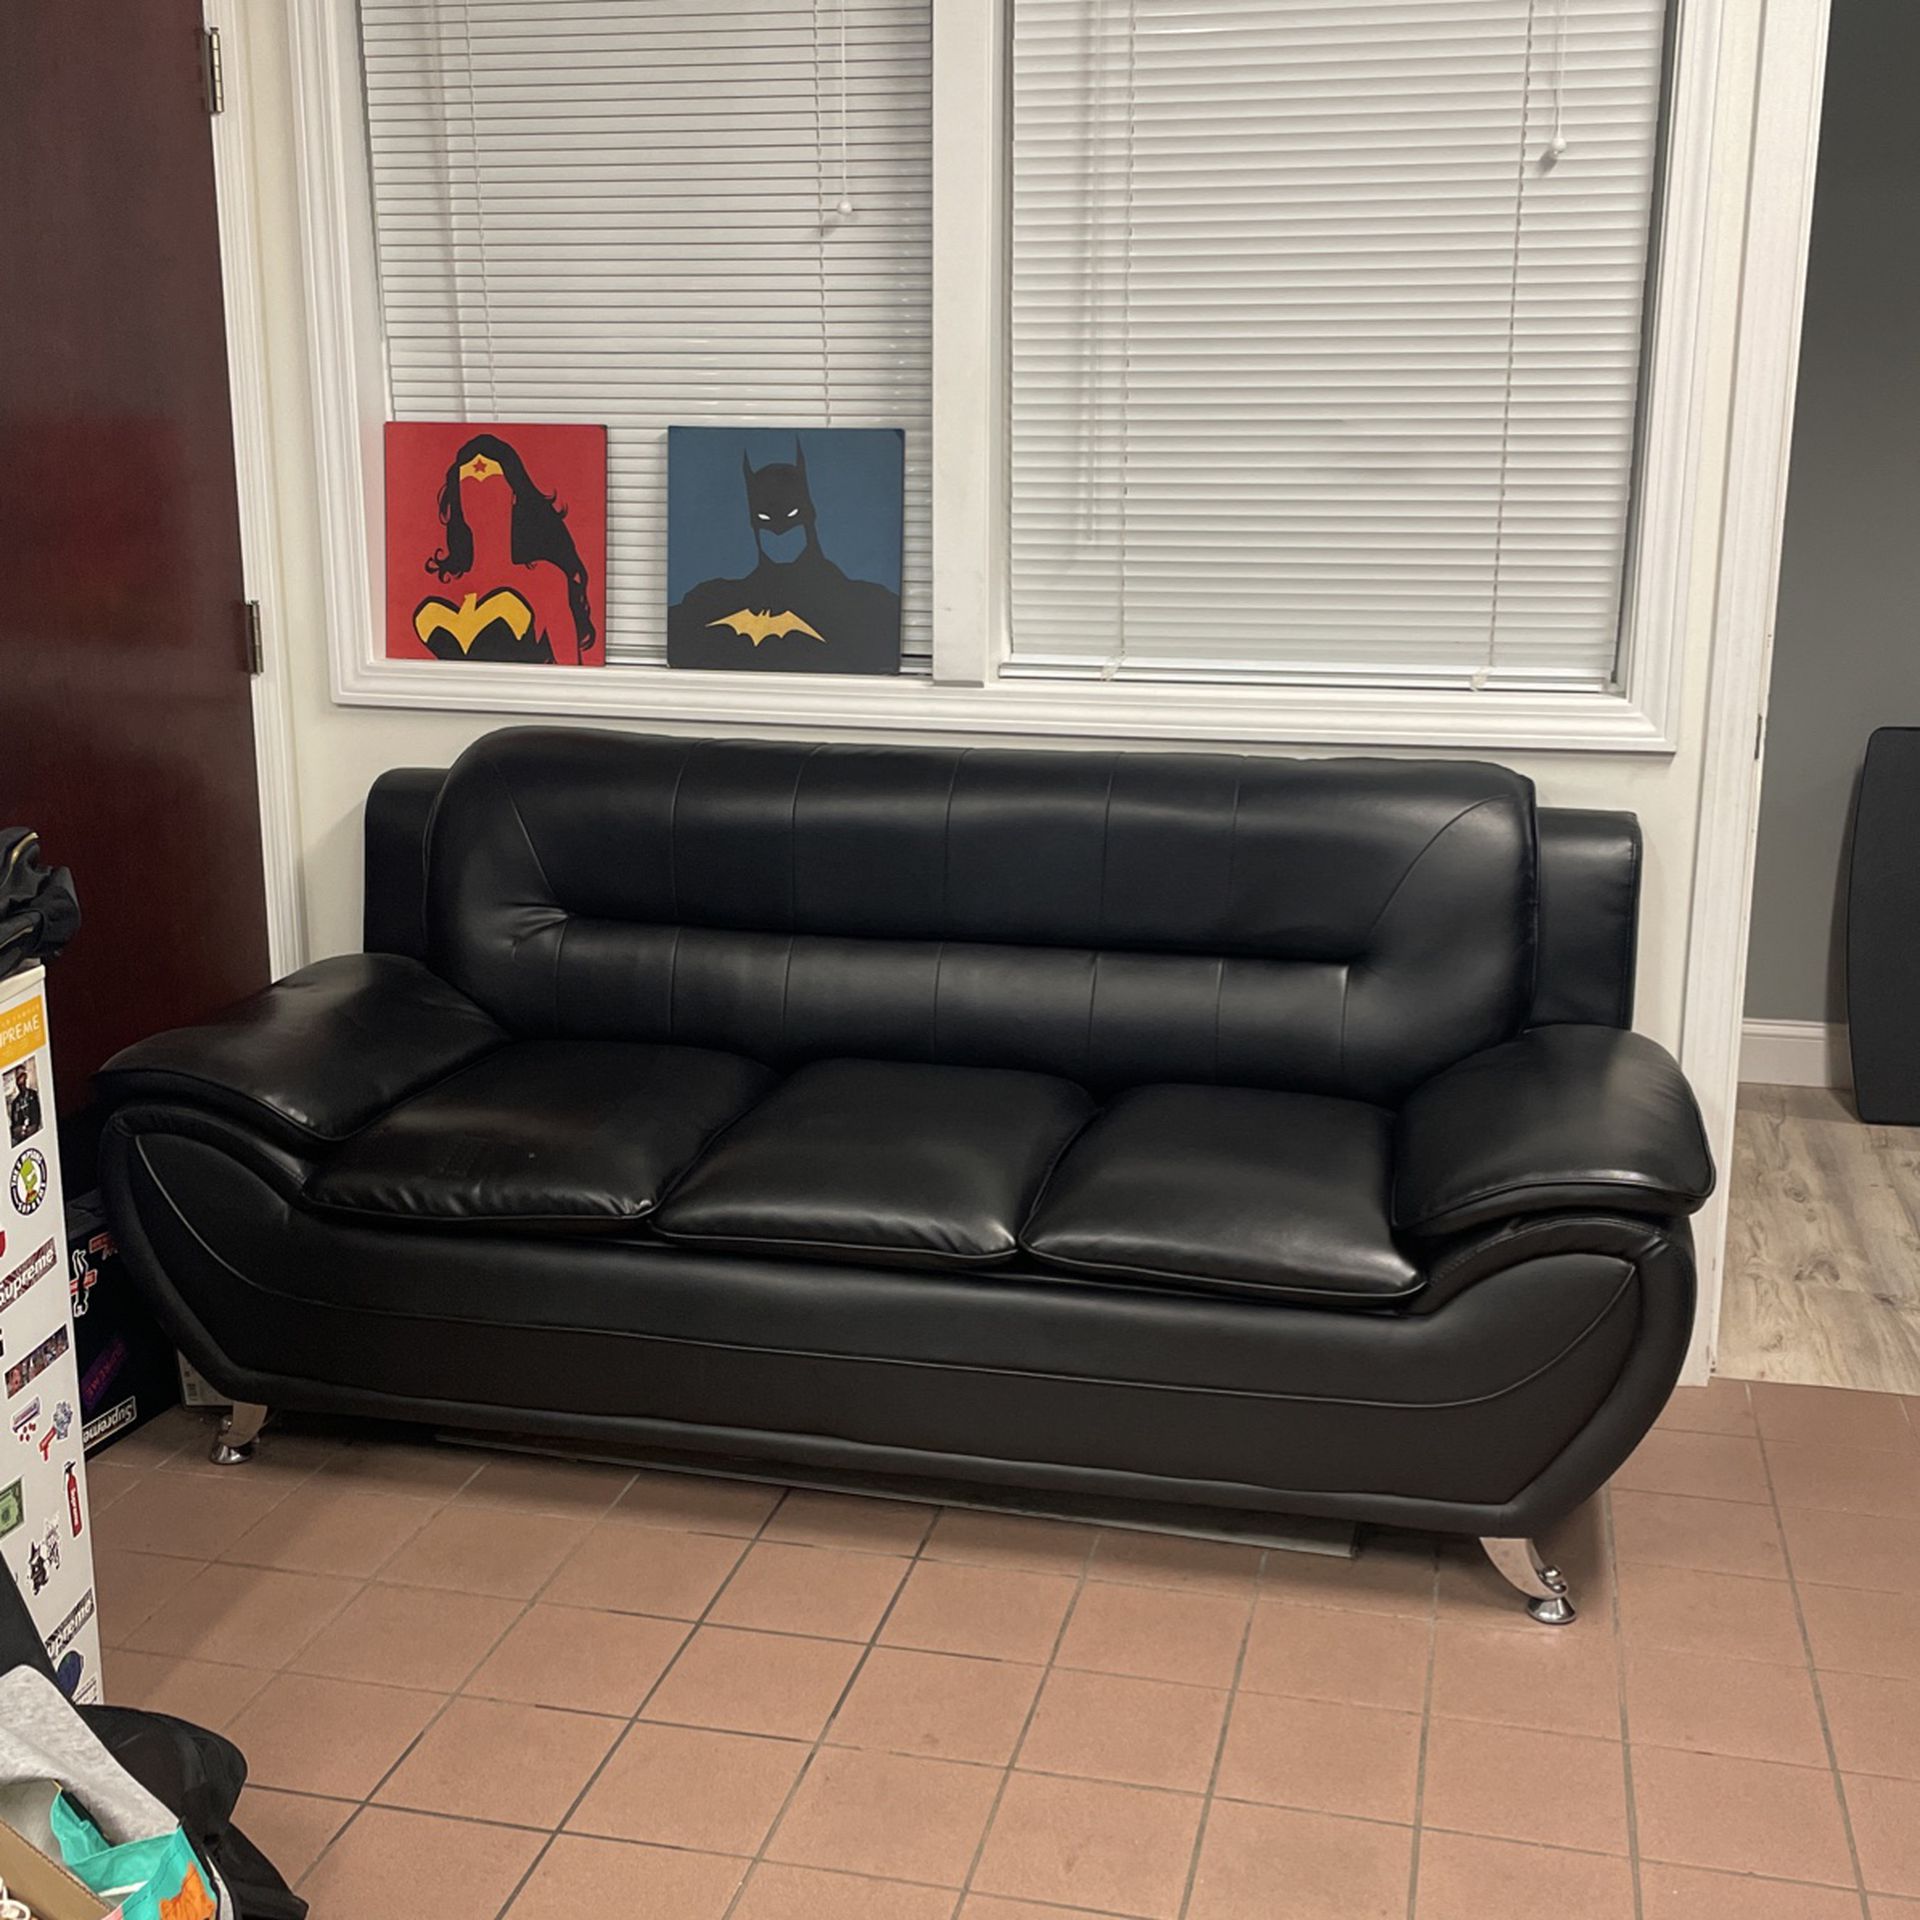 Black Lounger/ Sofa - Free (must Be Picked Up Today 5/16)